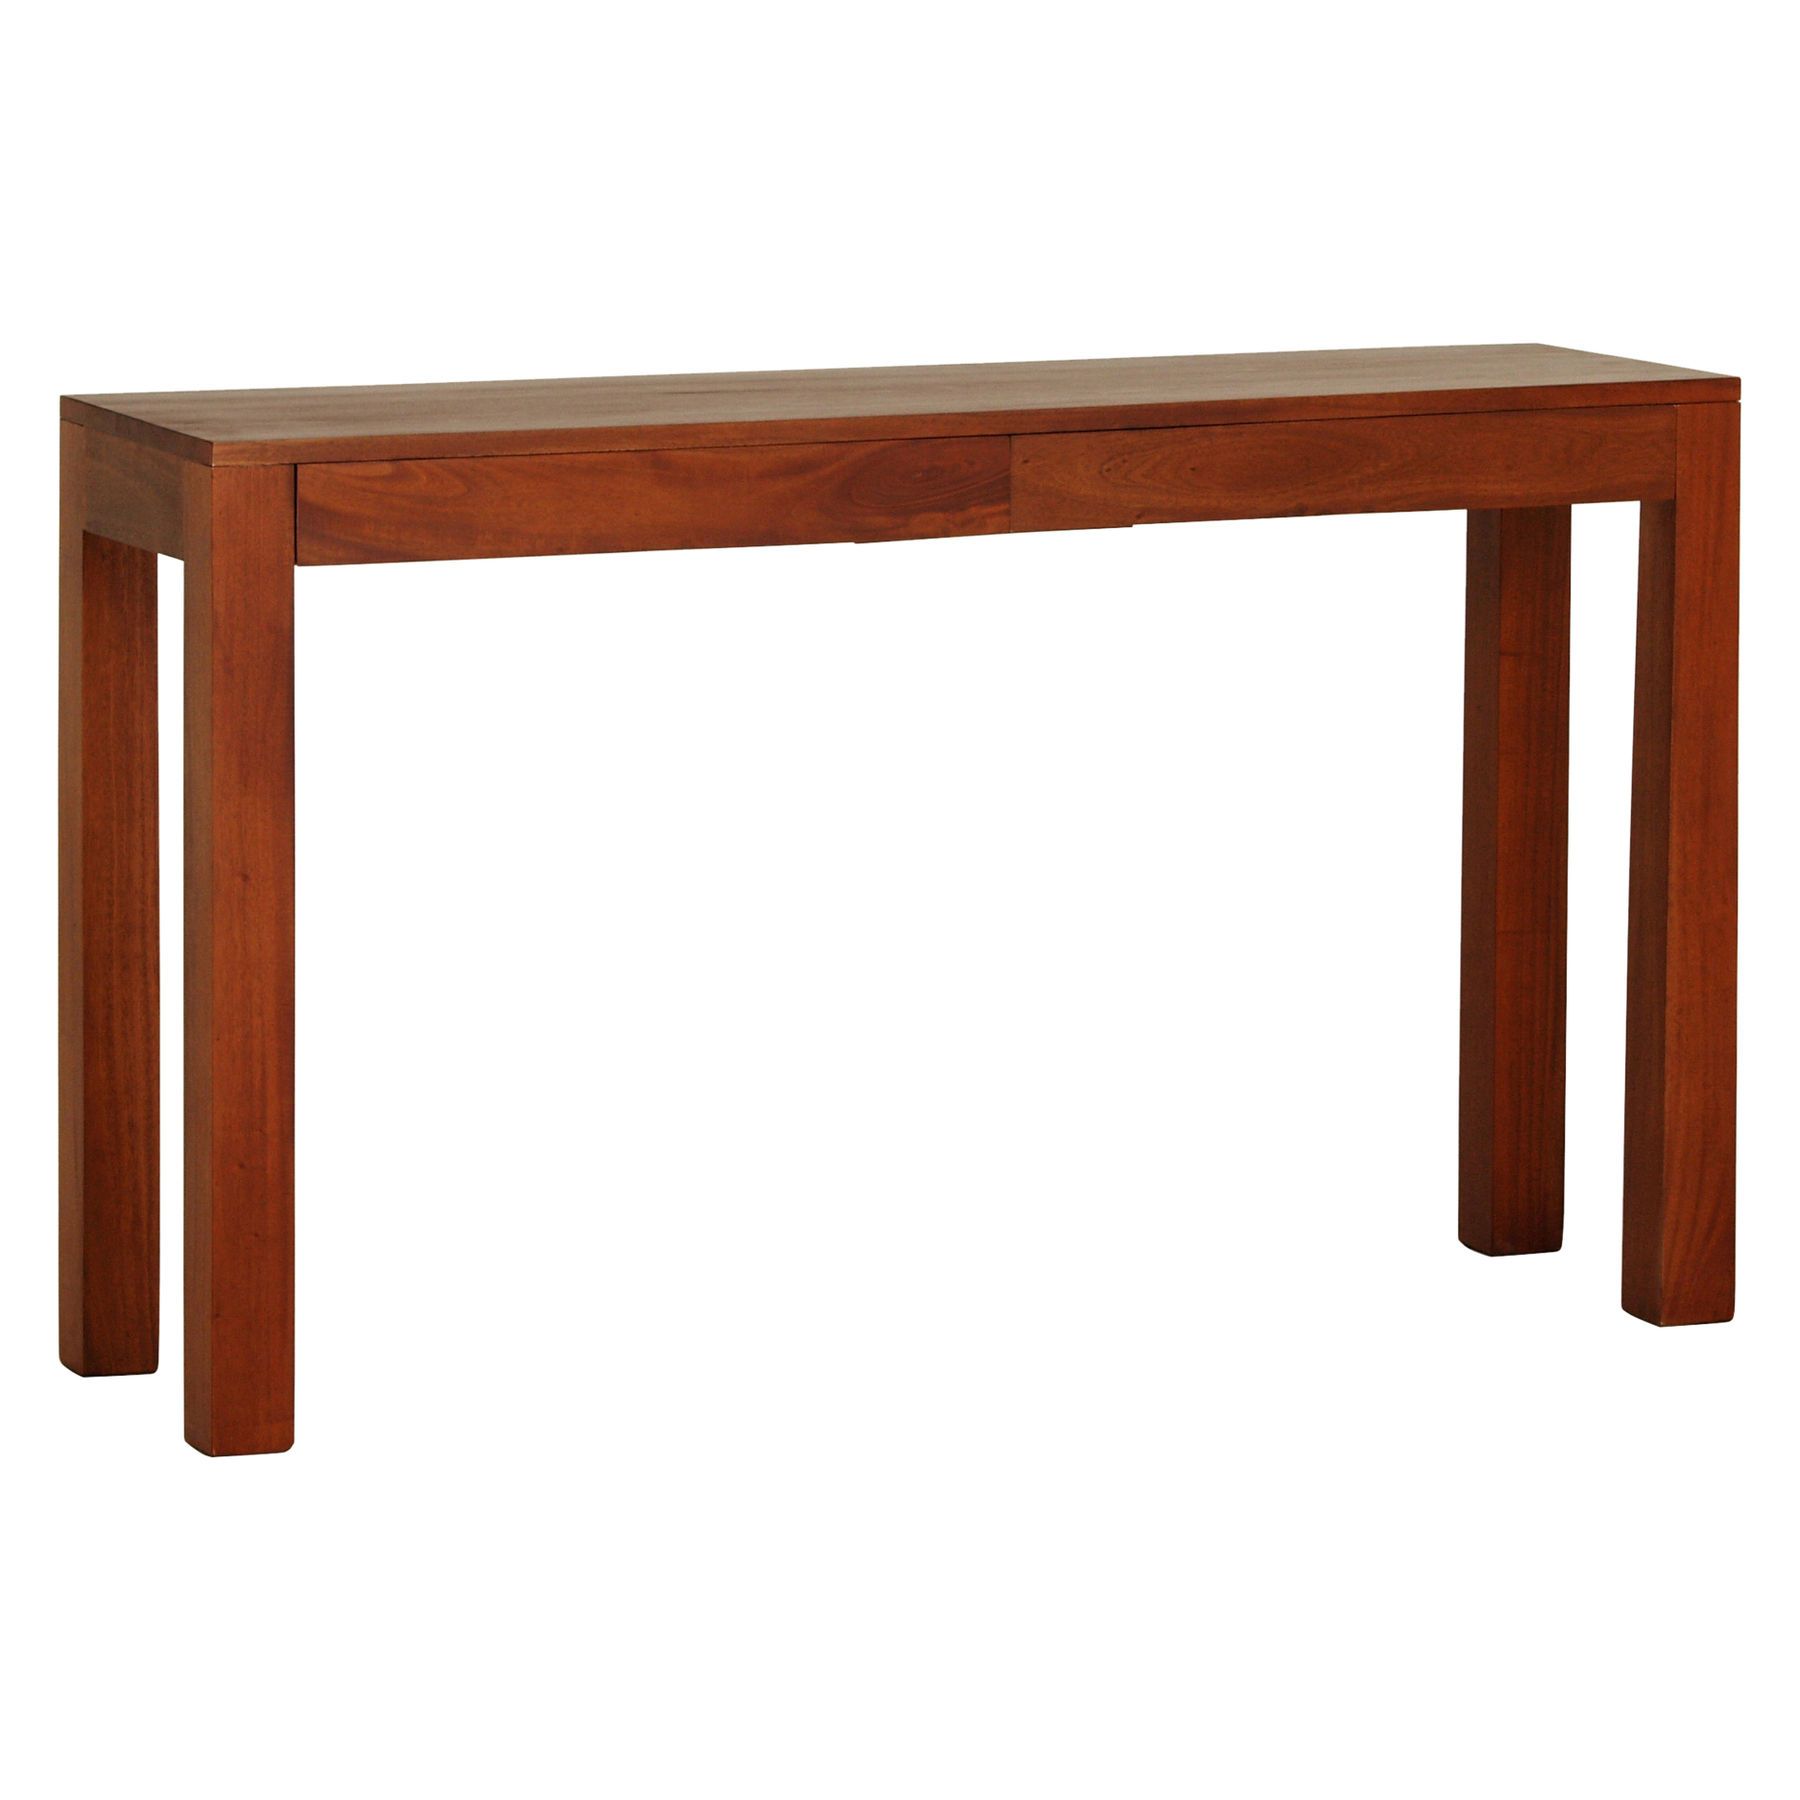 Hague 2 Drawer Timber Console Table, Pecankayu Estate Intended For Warm Pecan Console Tables (View 19 of 20)